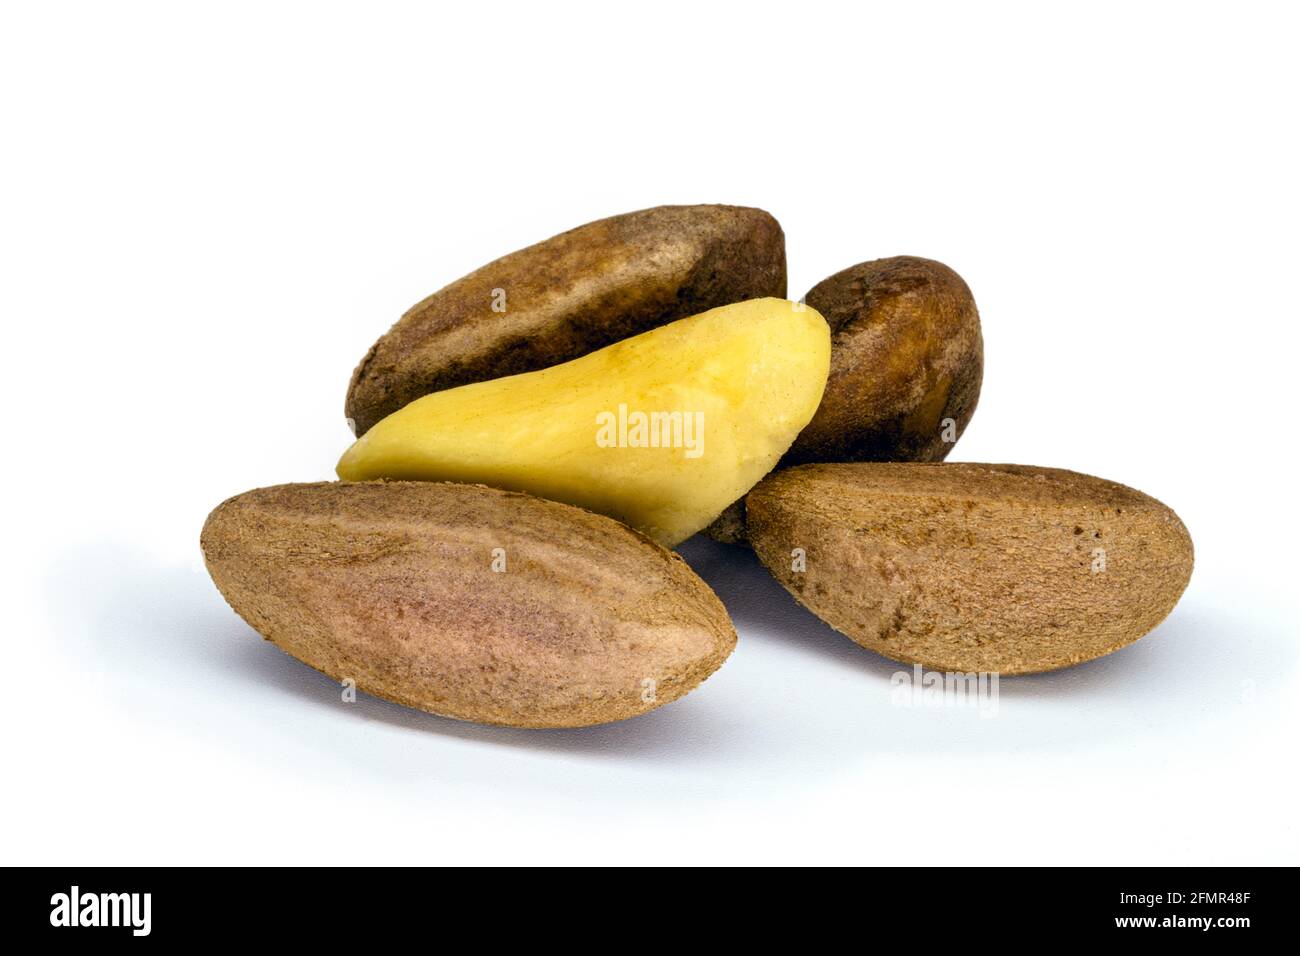 Brazilian chestnut natural from the Amazon rainforest, called the amazon nut or nut of pará Stock Photo